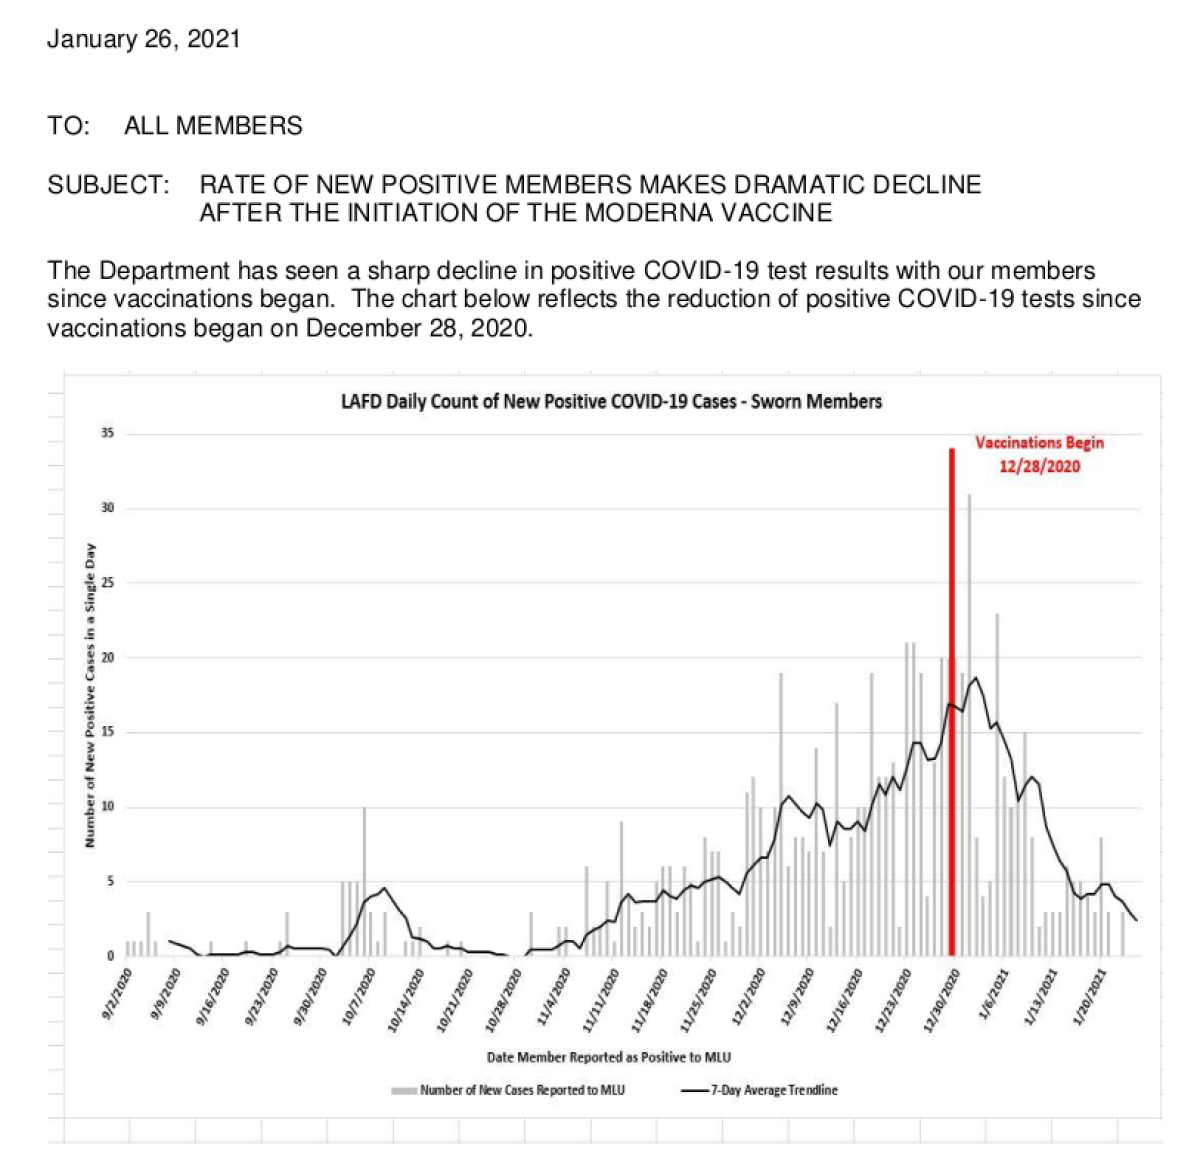 An internal LAFD memo shows new cases of COVID-19 falling after the introduction of a vaccination program.